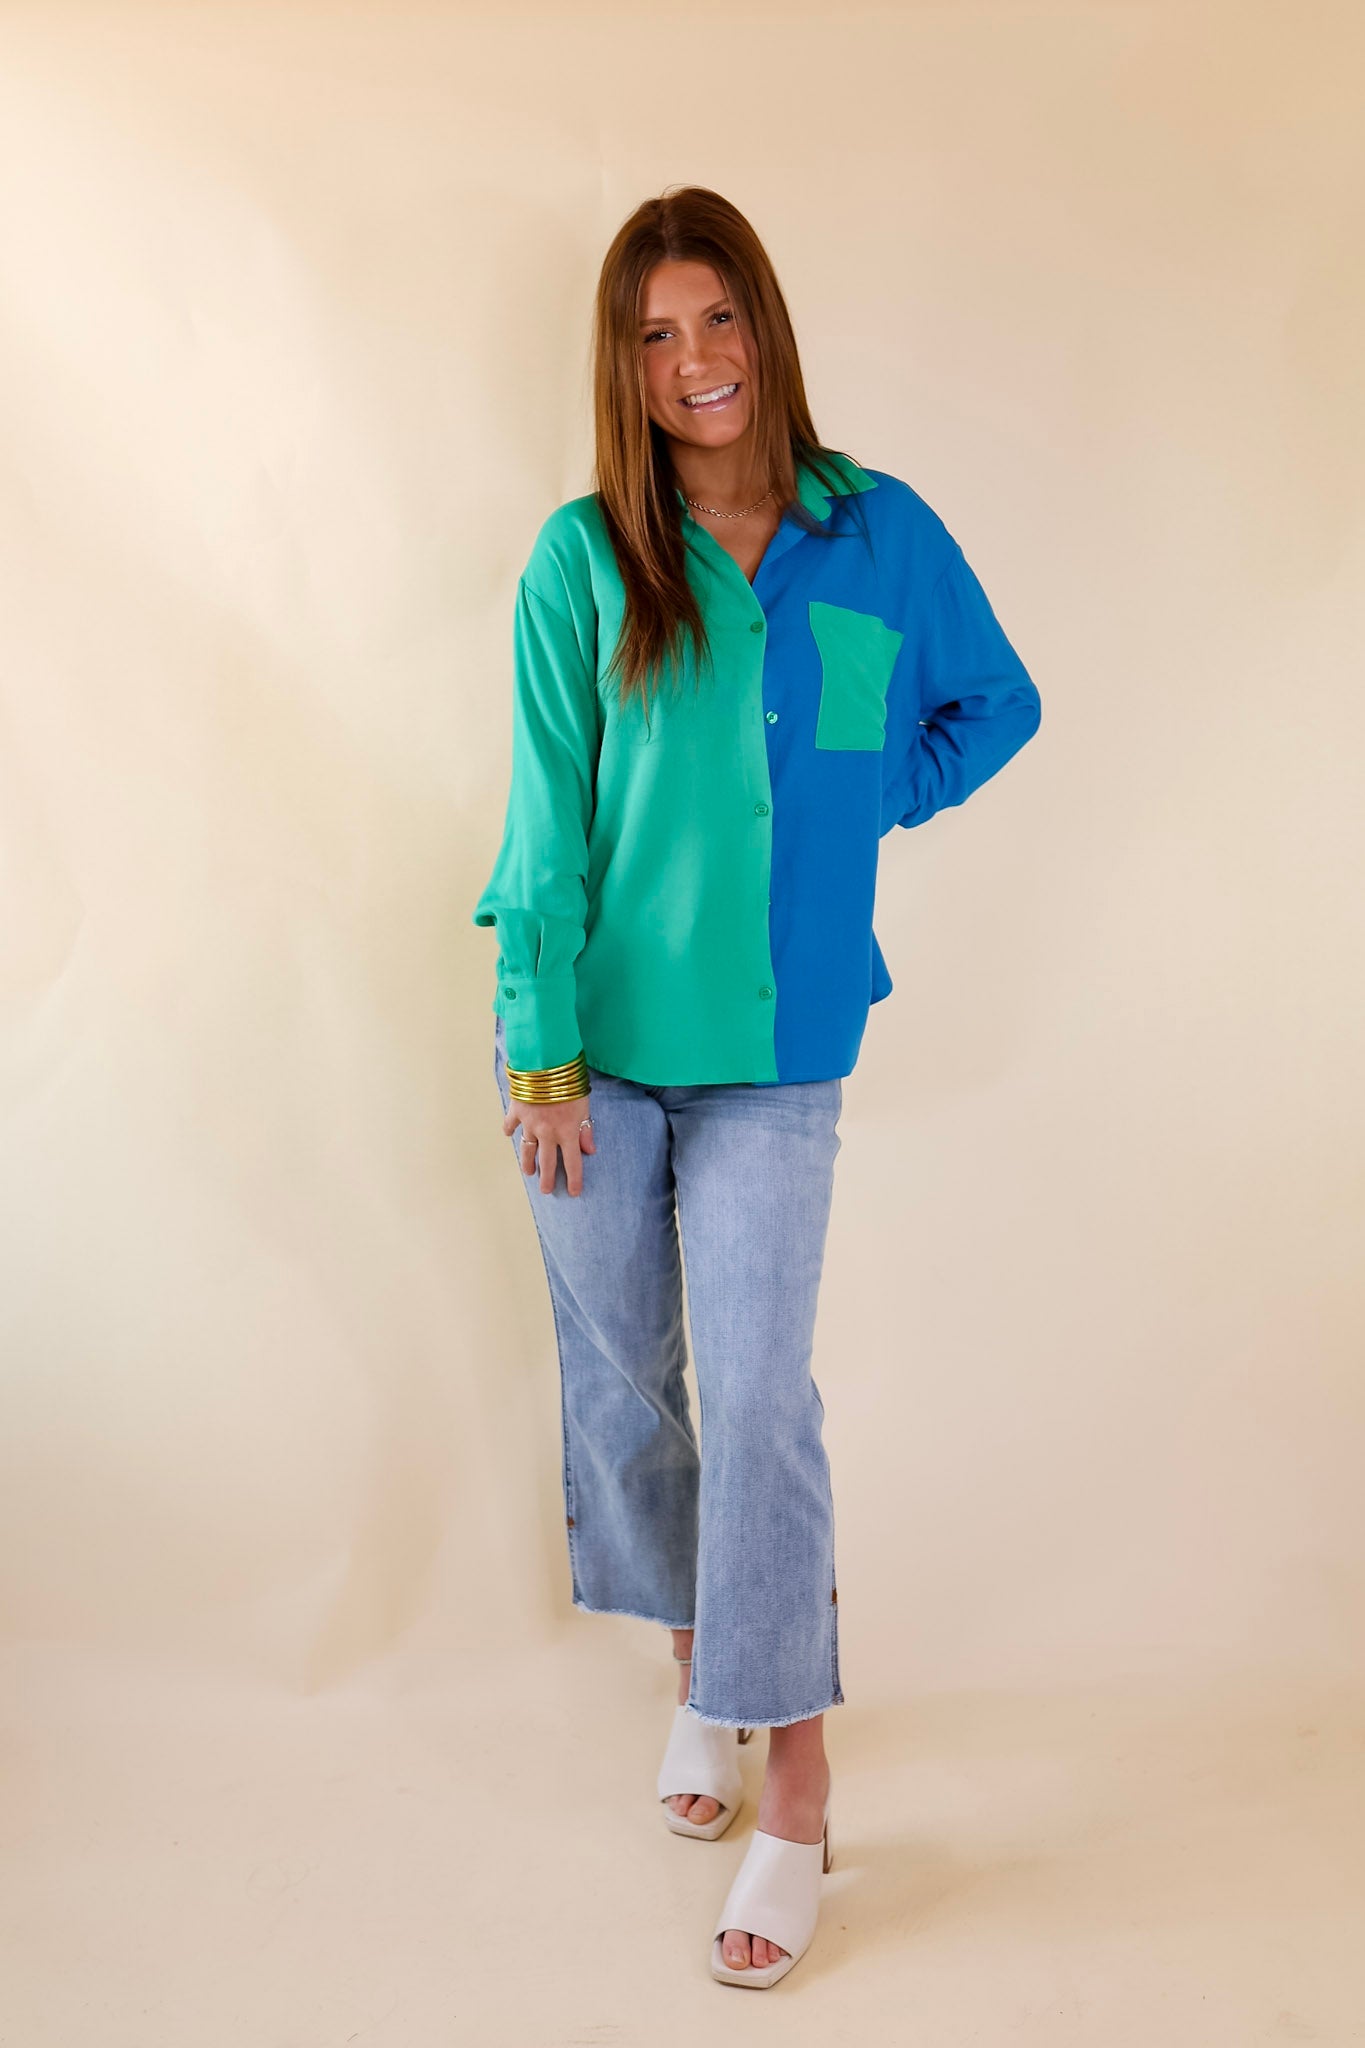 Play It Up Color Block Button Up Top in Blue and Green - Giddy Up Glamour Boutique